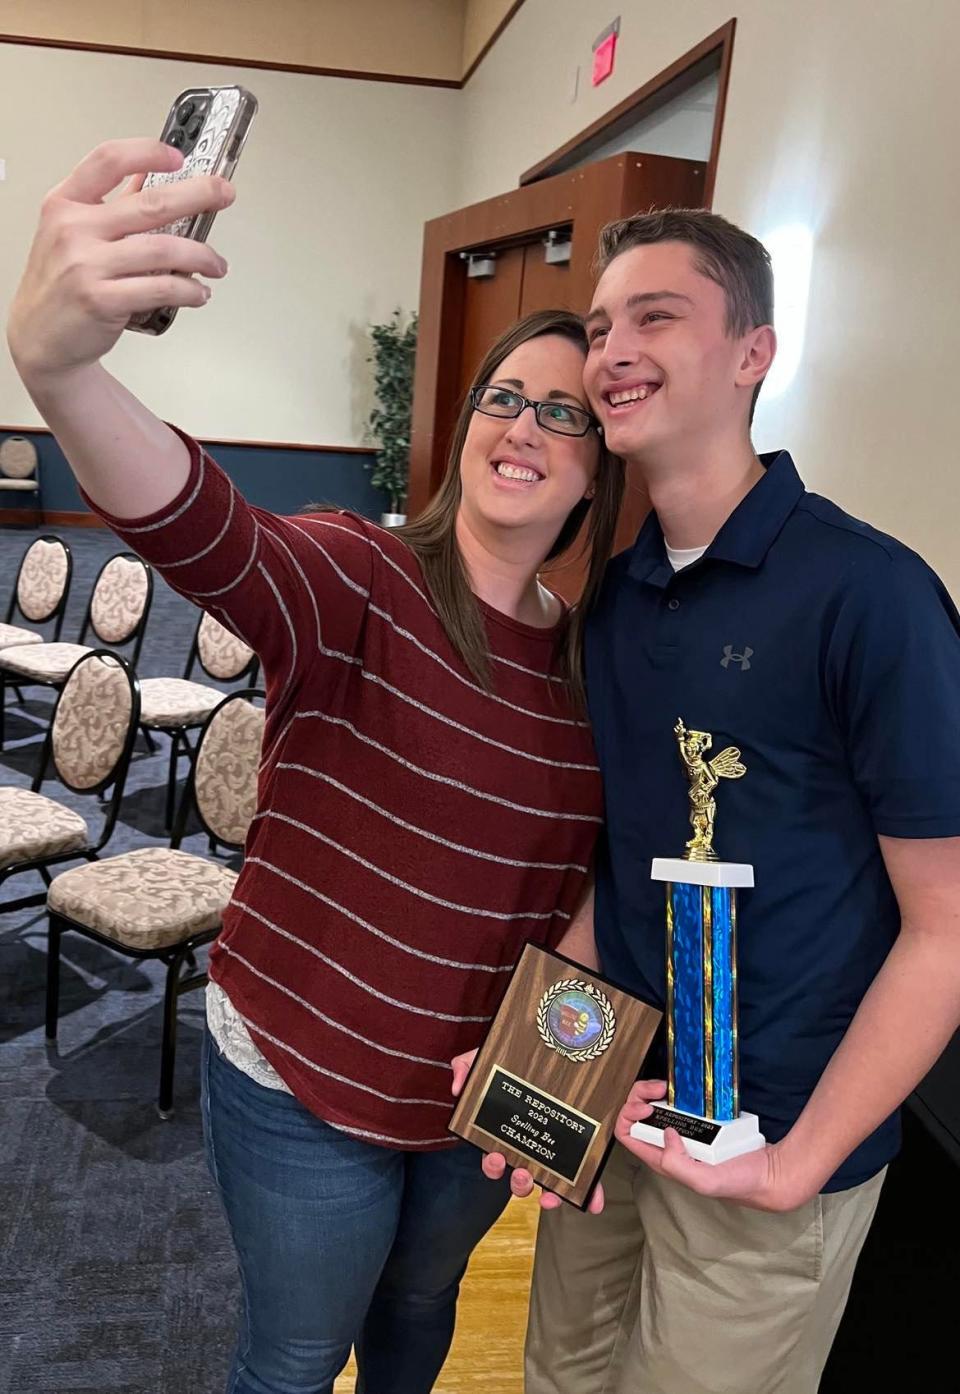 Bryce Beckley, 14, of Dover Middle School, takes a photo with his mother, Lyndy Beckley, after he won The Canton Repository's 77th Regional Final Spelling Bee on March 4 at the Kent State University at Stark Conference Center.